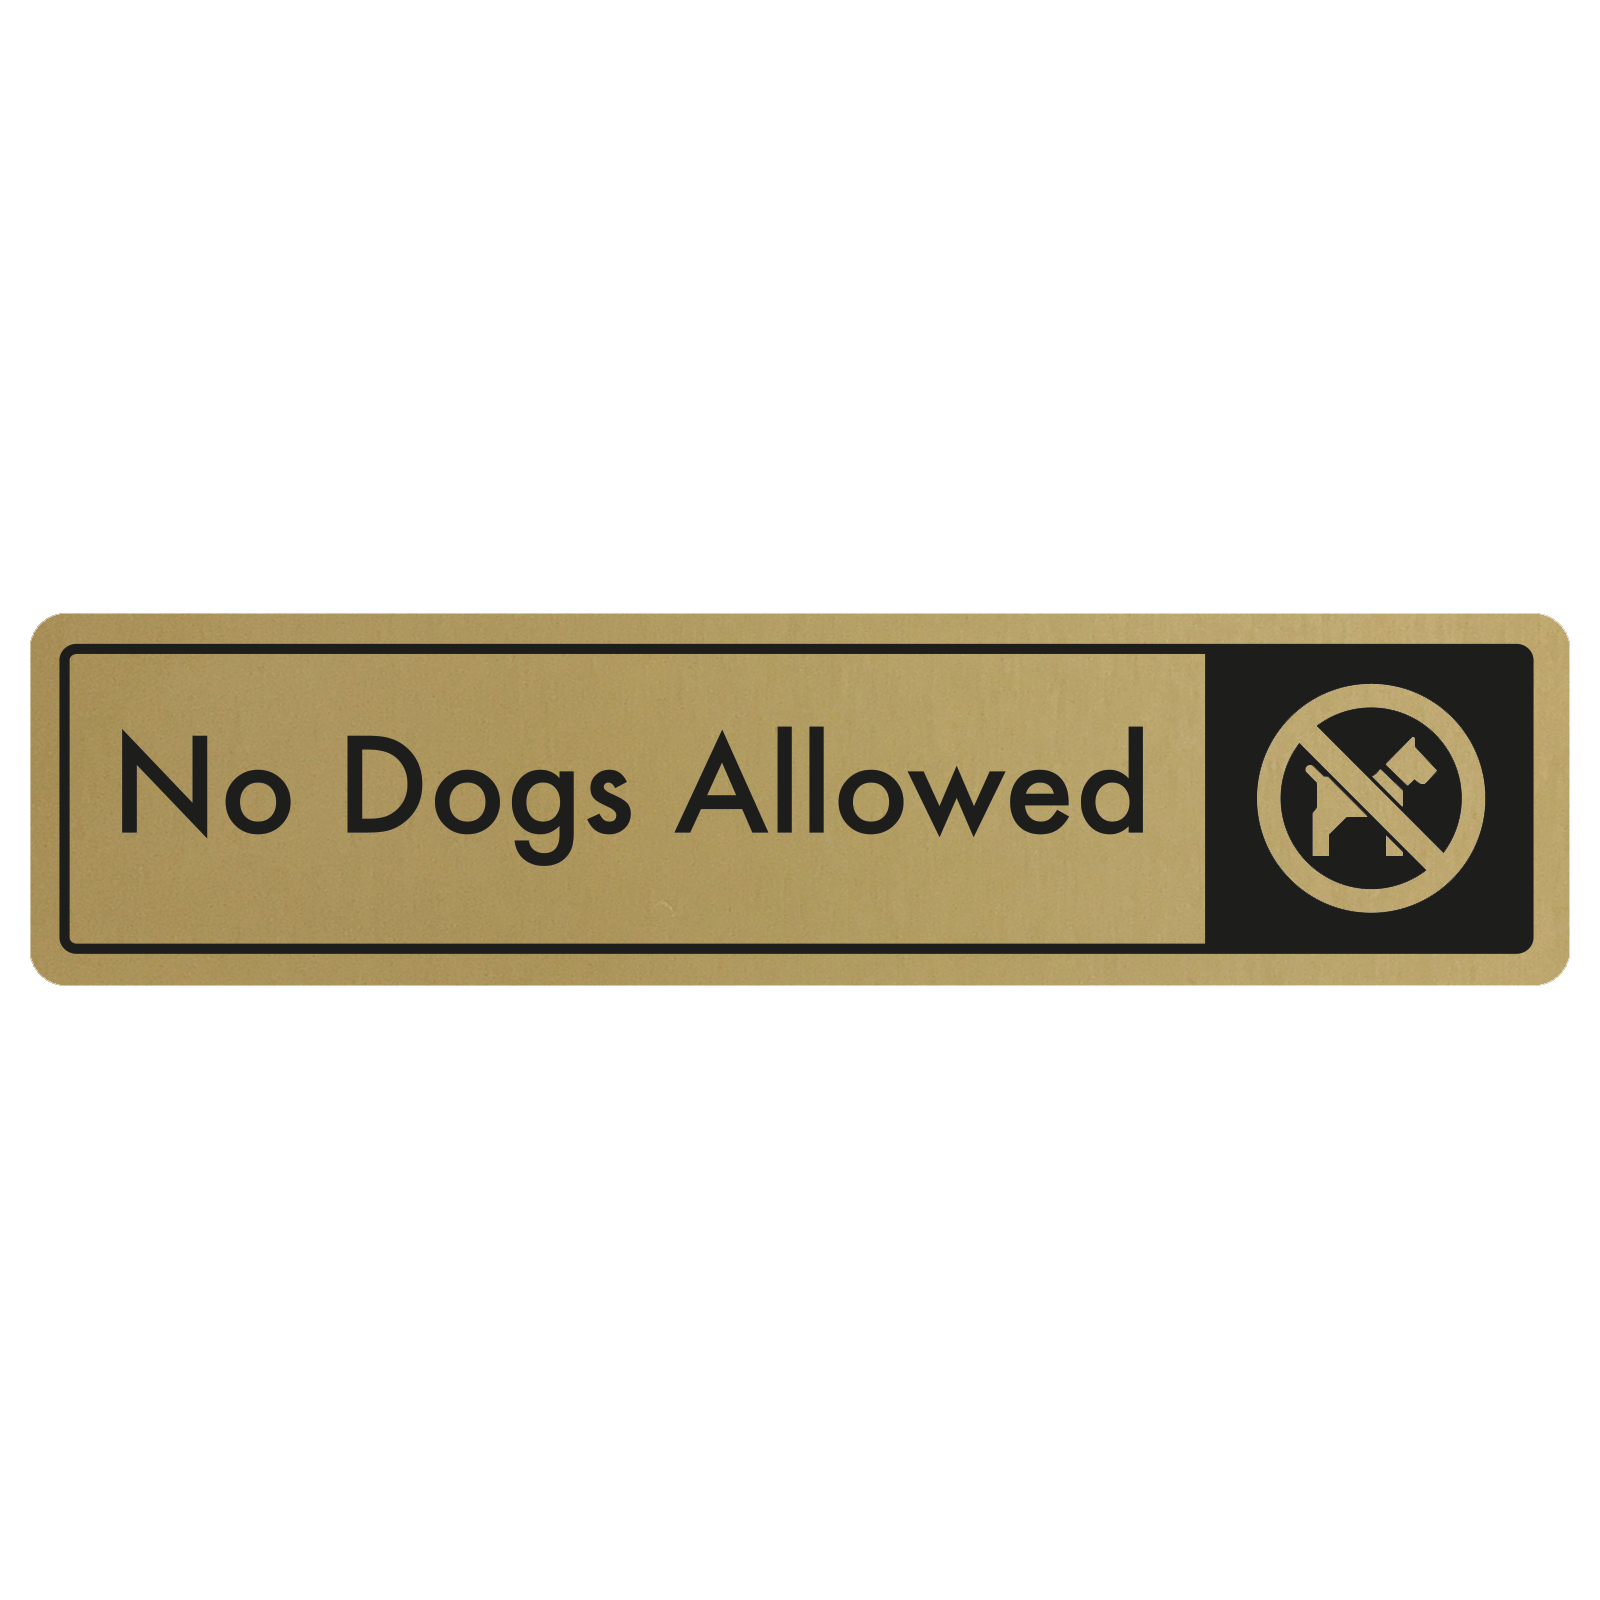 No Dogs Allowed Door Sign - Black on Gold